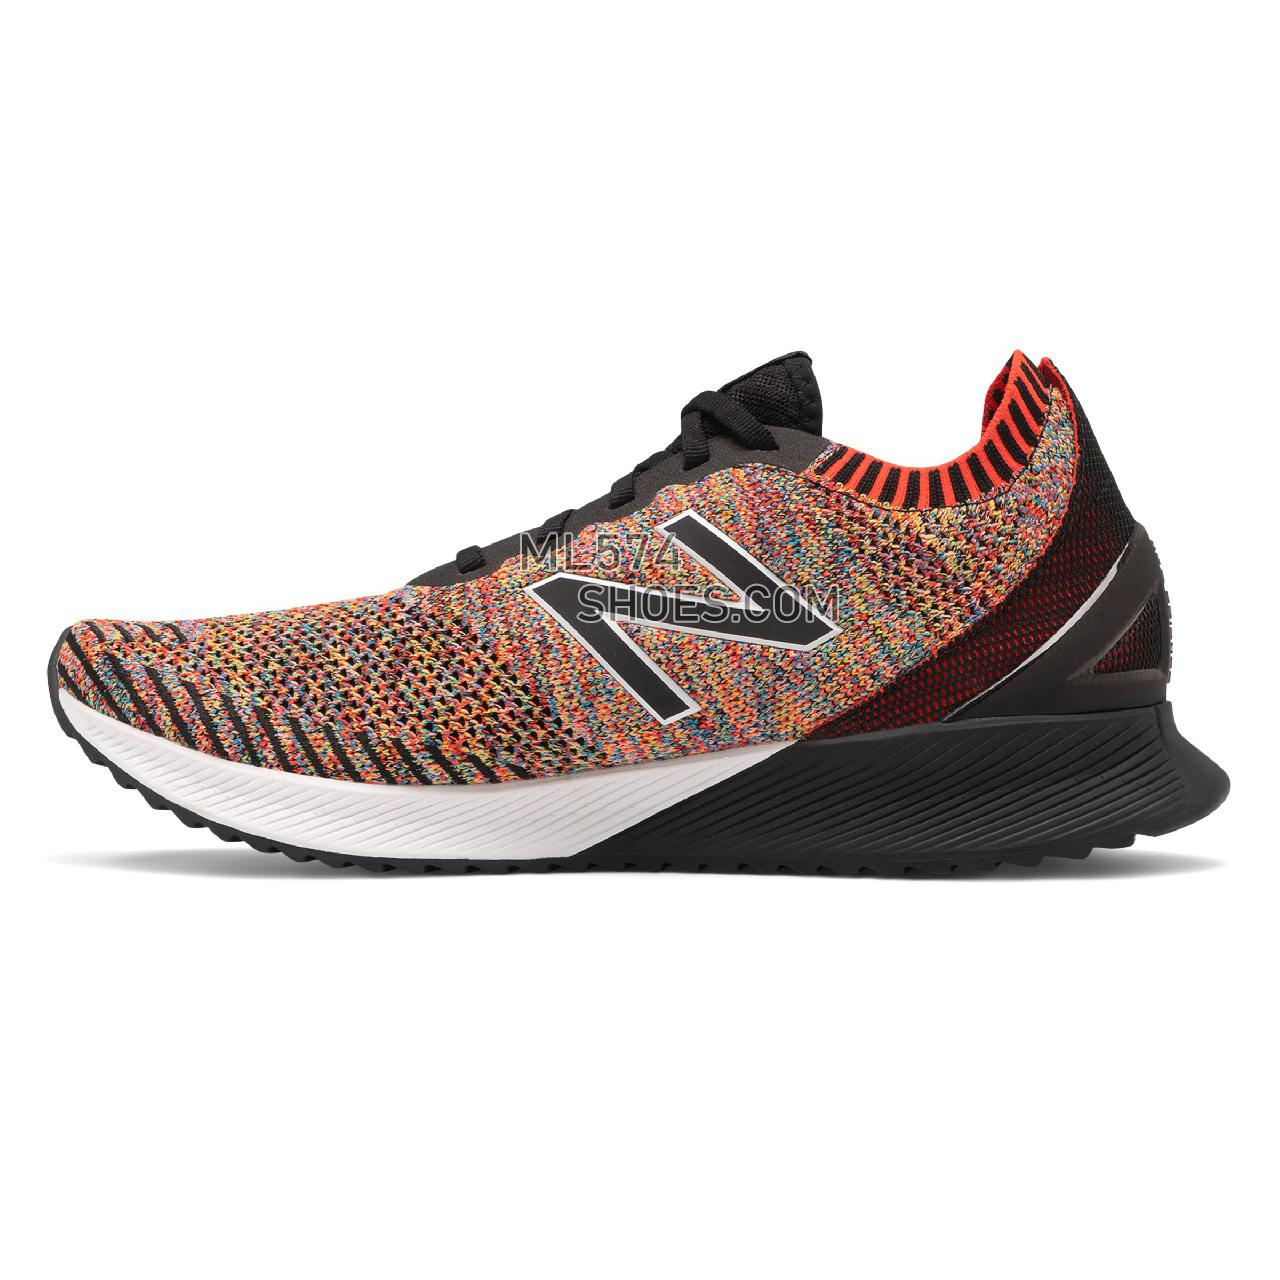 New Balance FuelCell Echo - Men's Neutral Running - Neo Flame with Sulphur Yellow and Vision Blue - MFCECCM